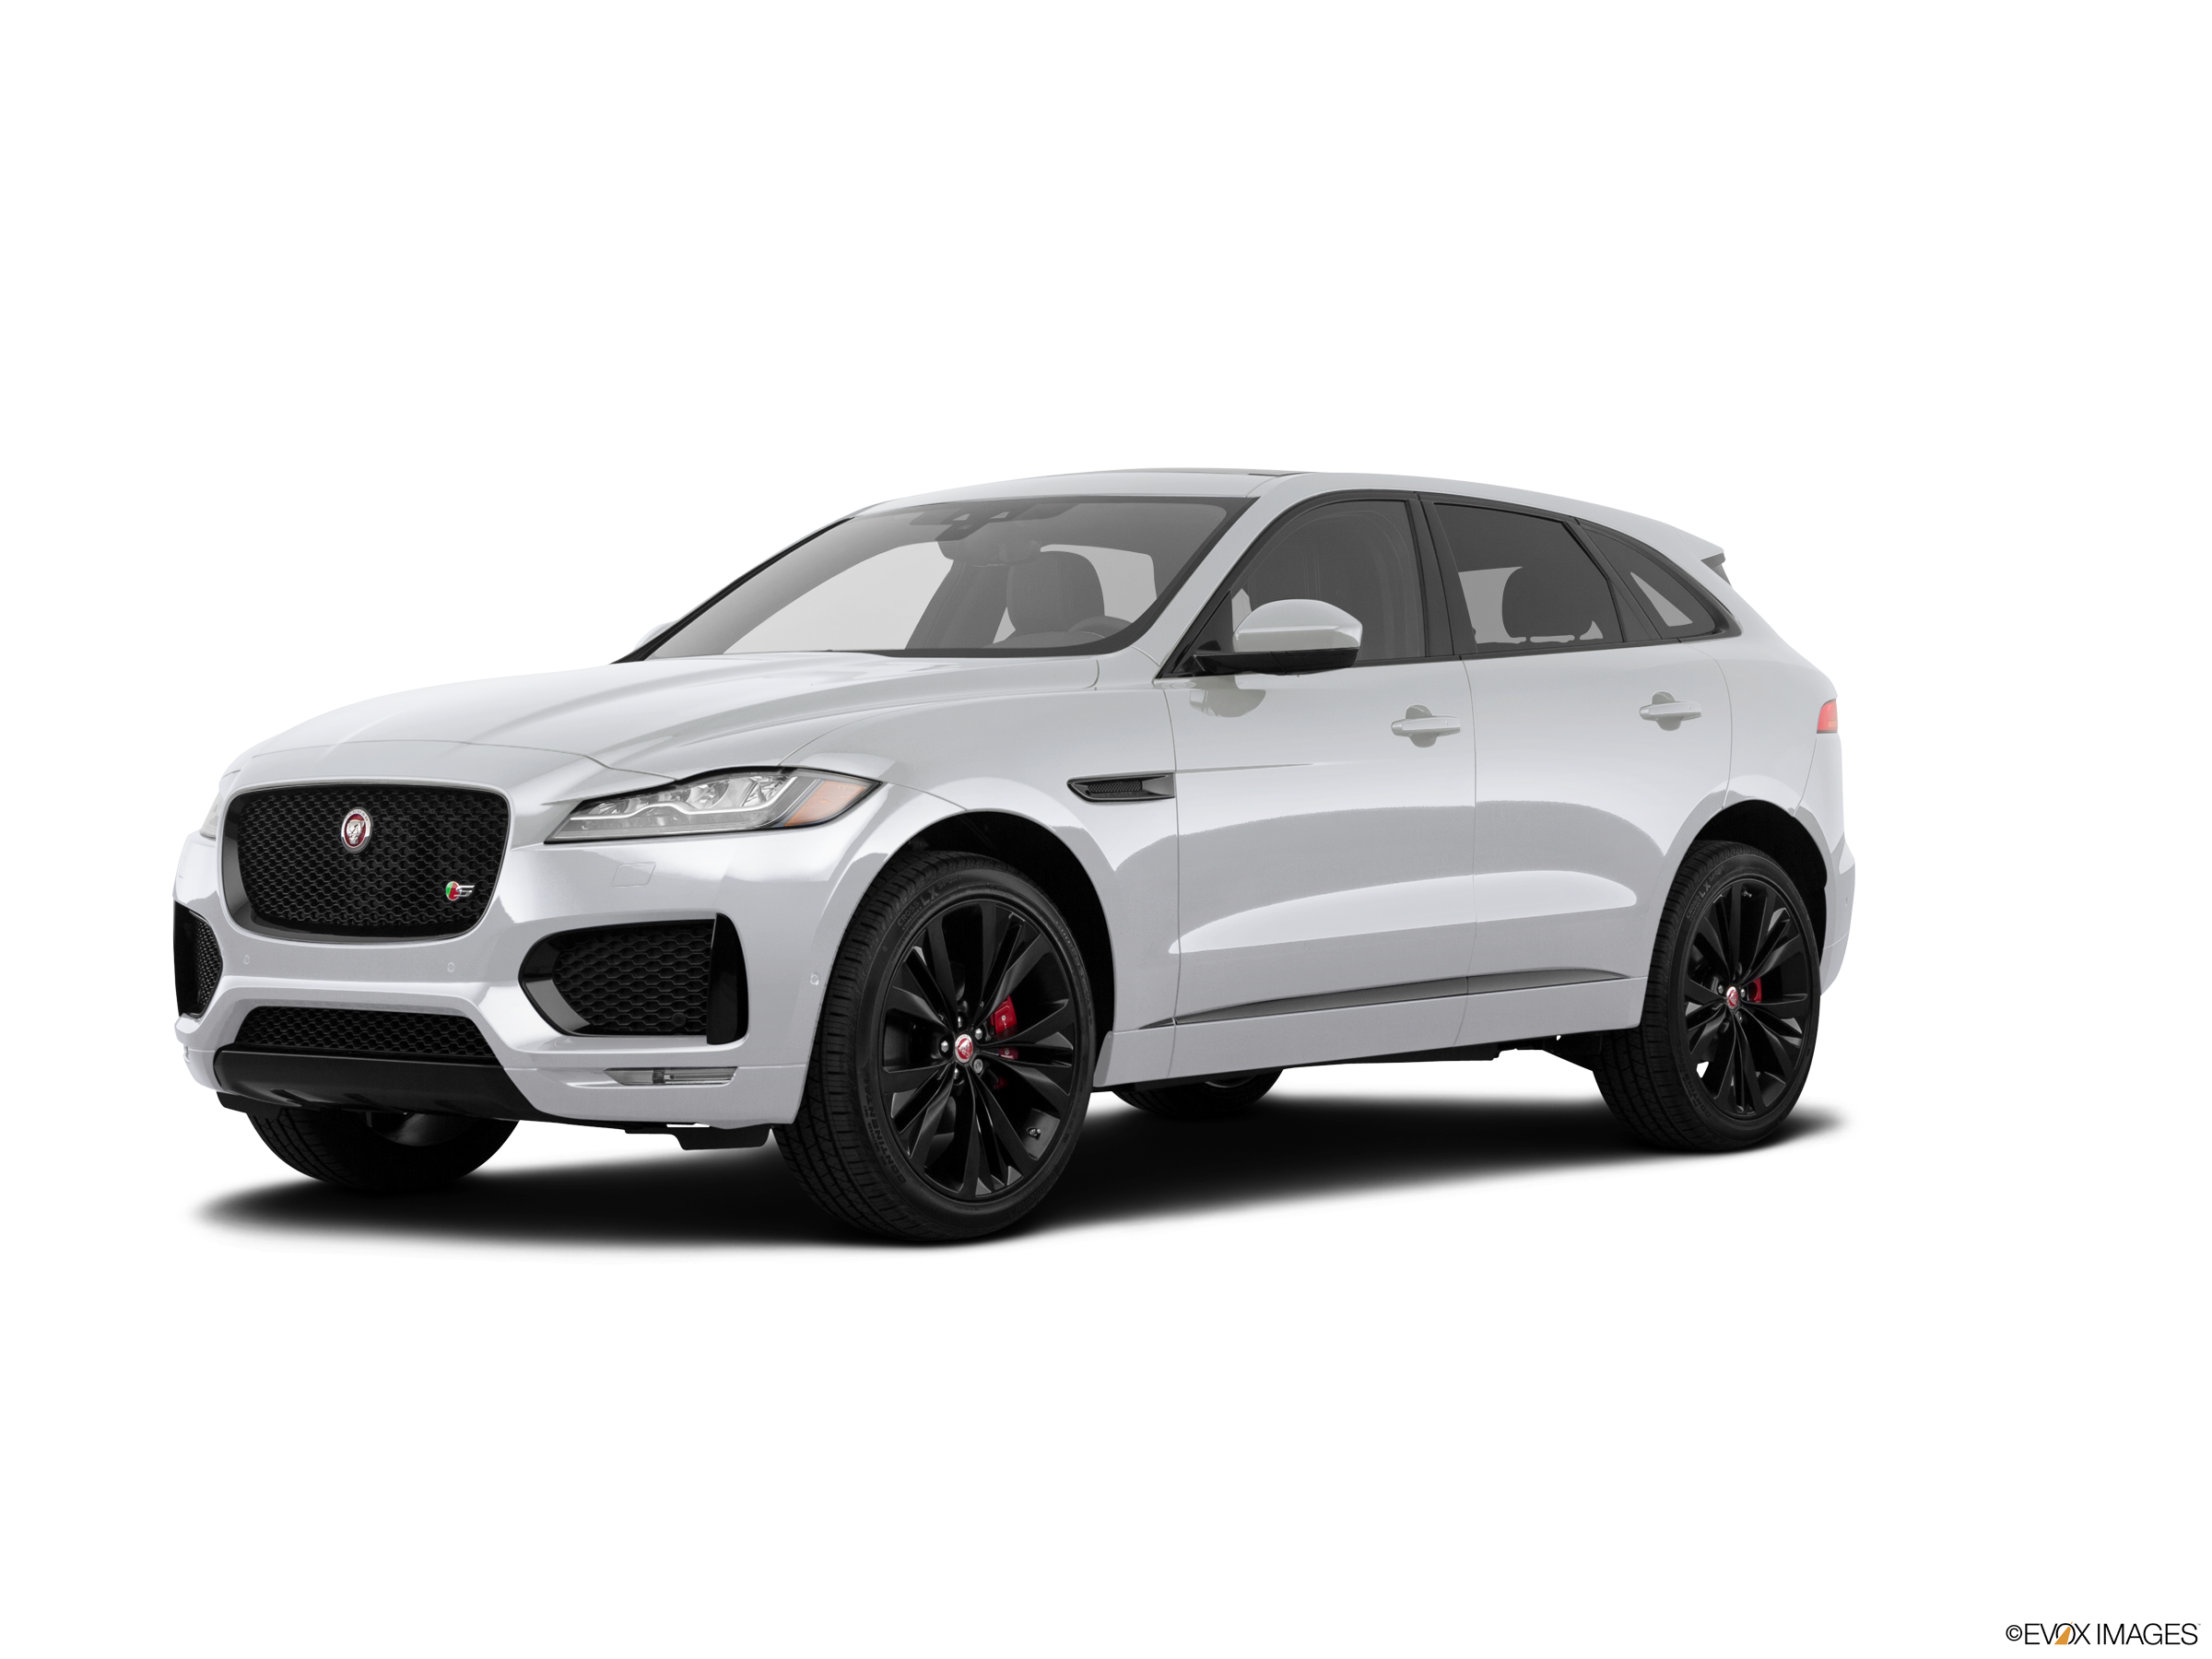 Used 2019 Jaguar F-PACE 30t R-Sport SUV 4D Prices | Kelley Blue Book